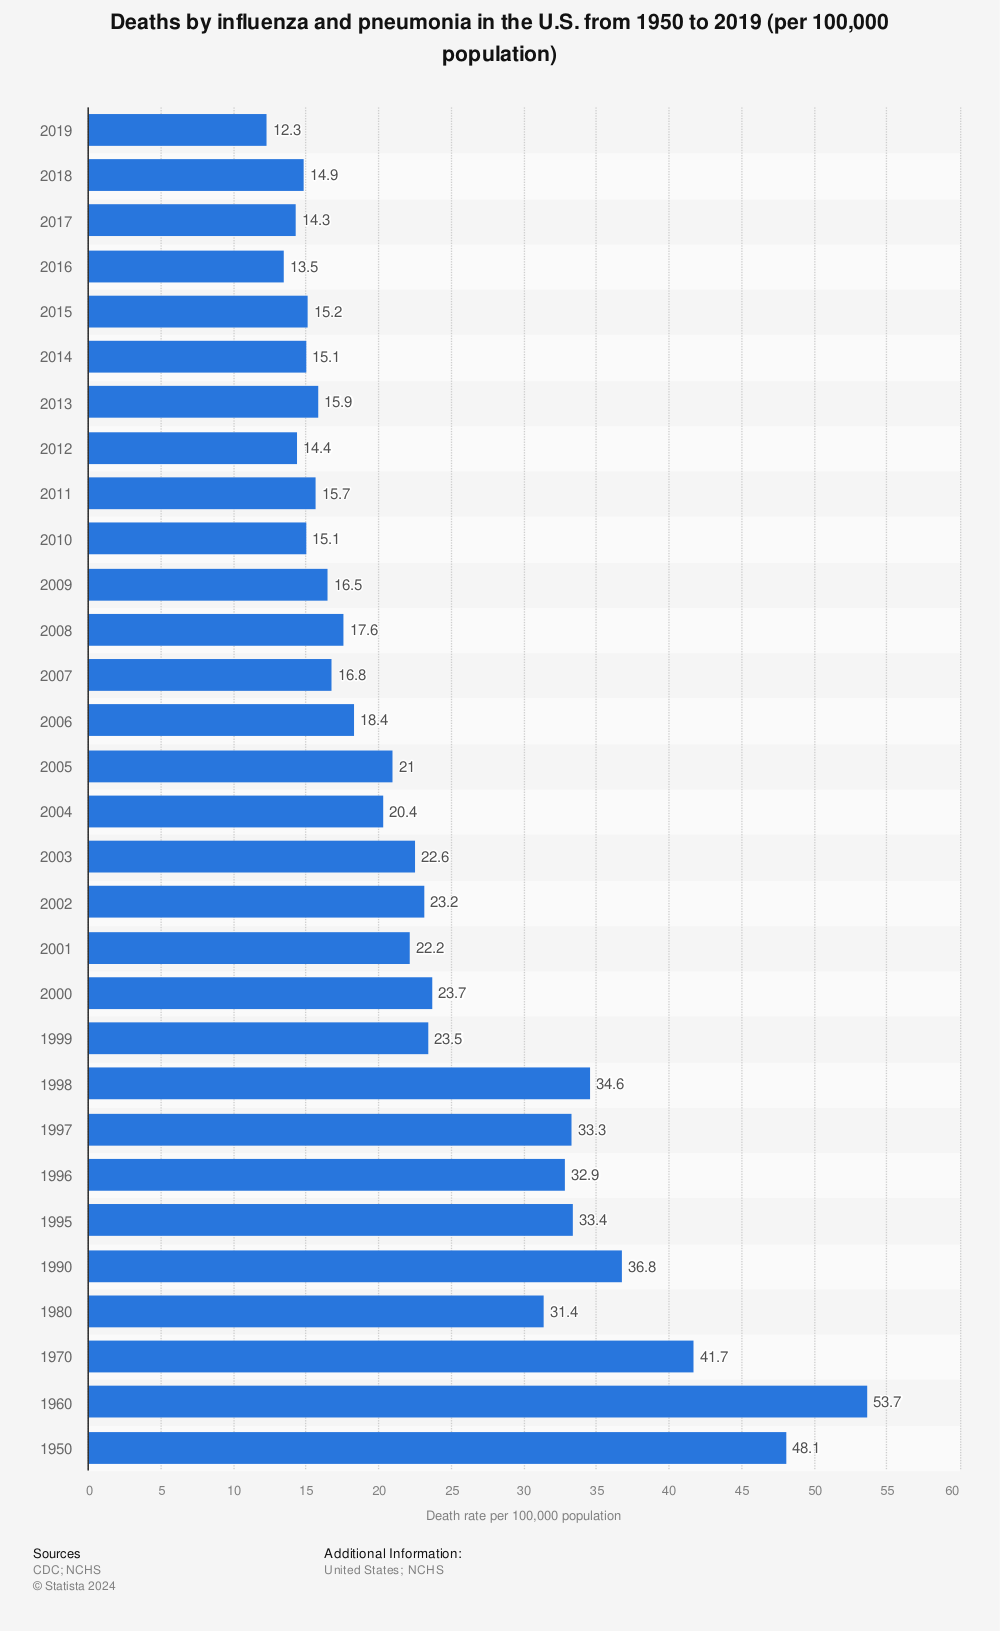 Statistic: Deaths by influenza and pneumonia in the U.S. from 1950 to 2018 (per 100,000 population) | Statista